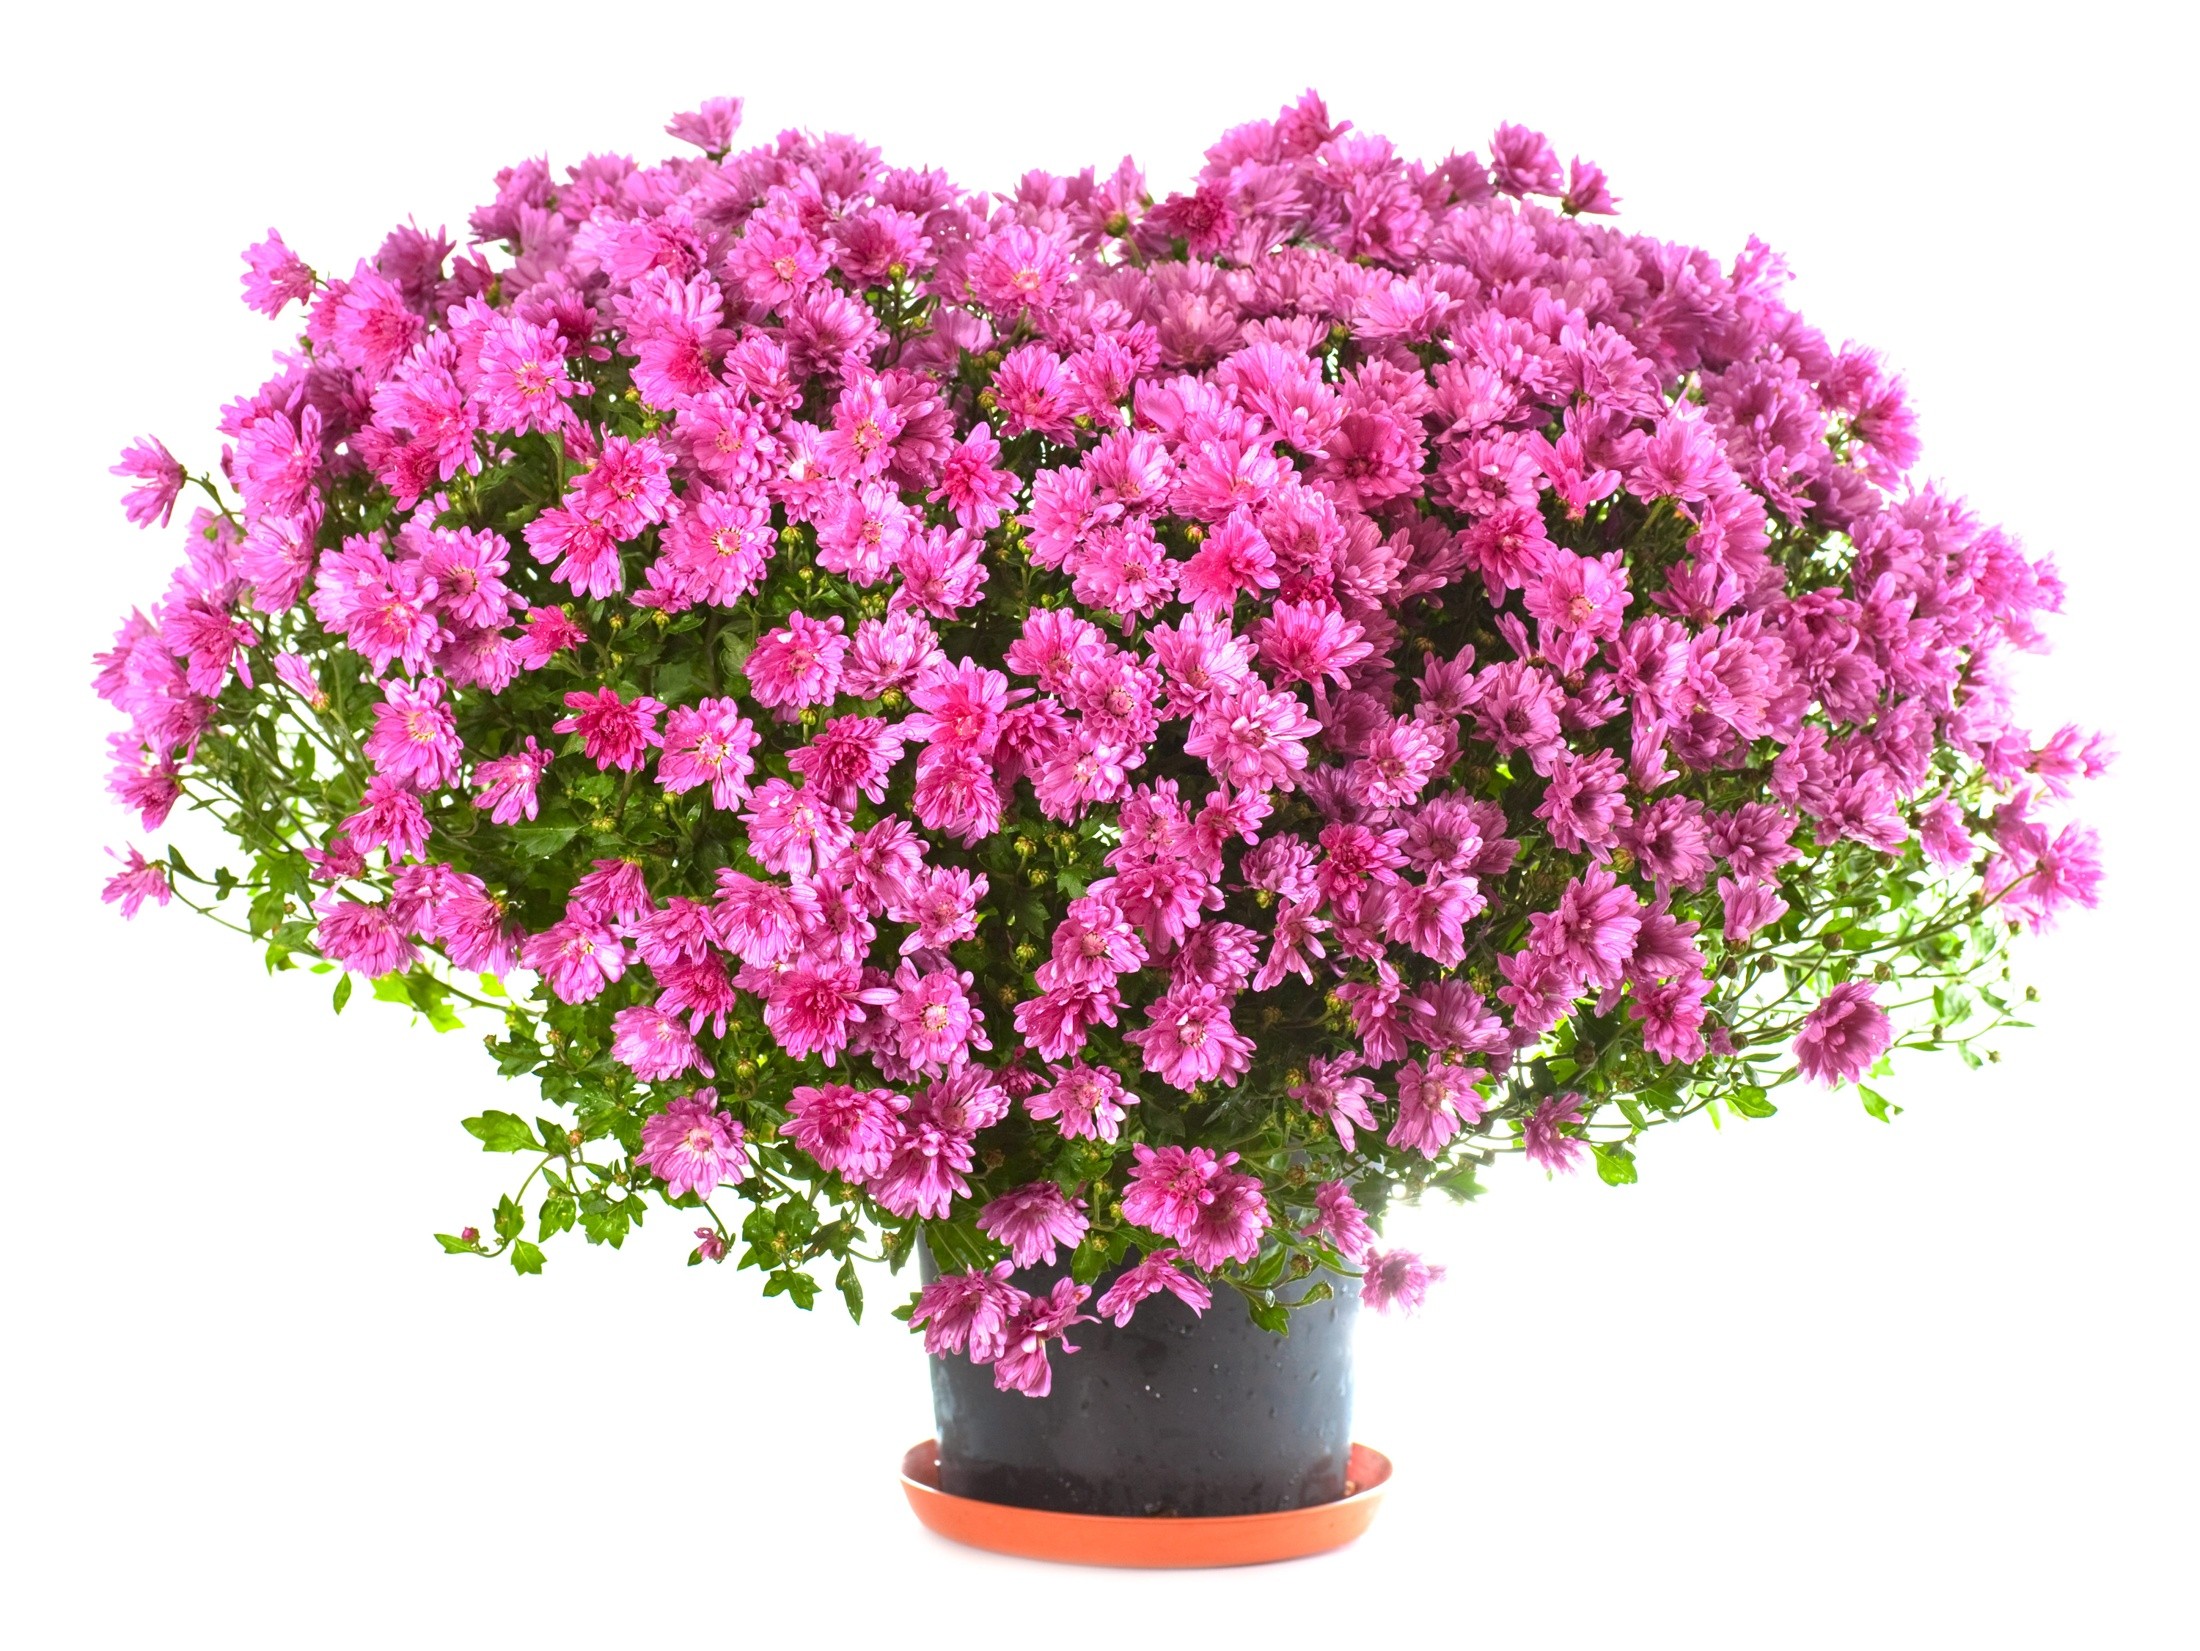 General 2200x1651 flowers plants pink flowers white background